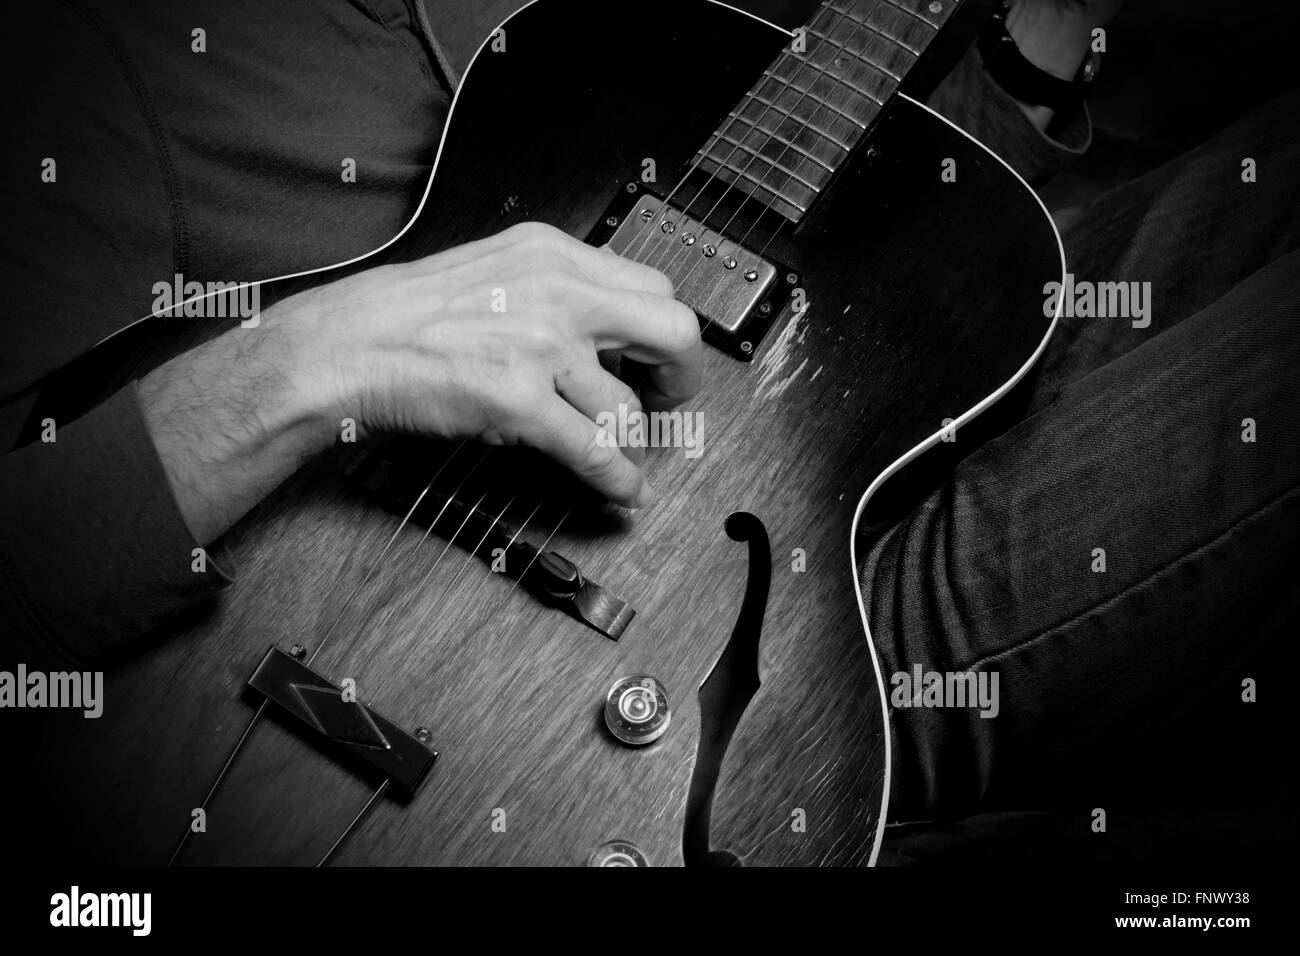 Practicing steel string guitar in informal setting- focus on right hand Stock Photo